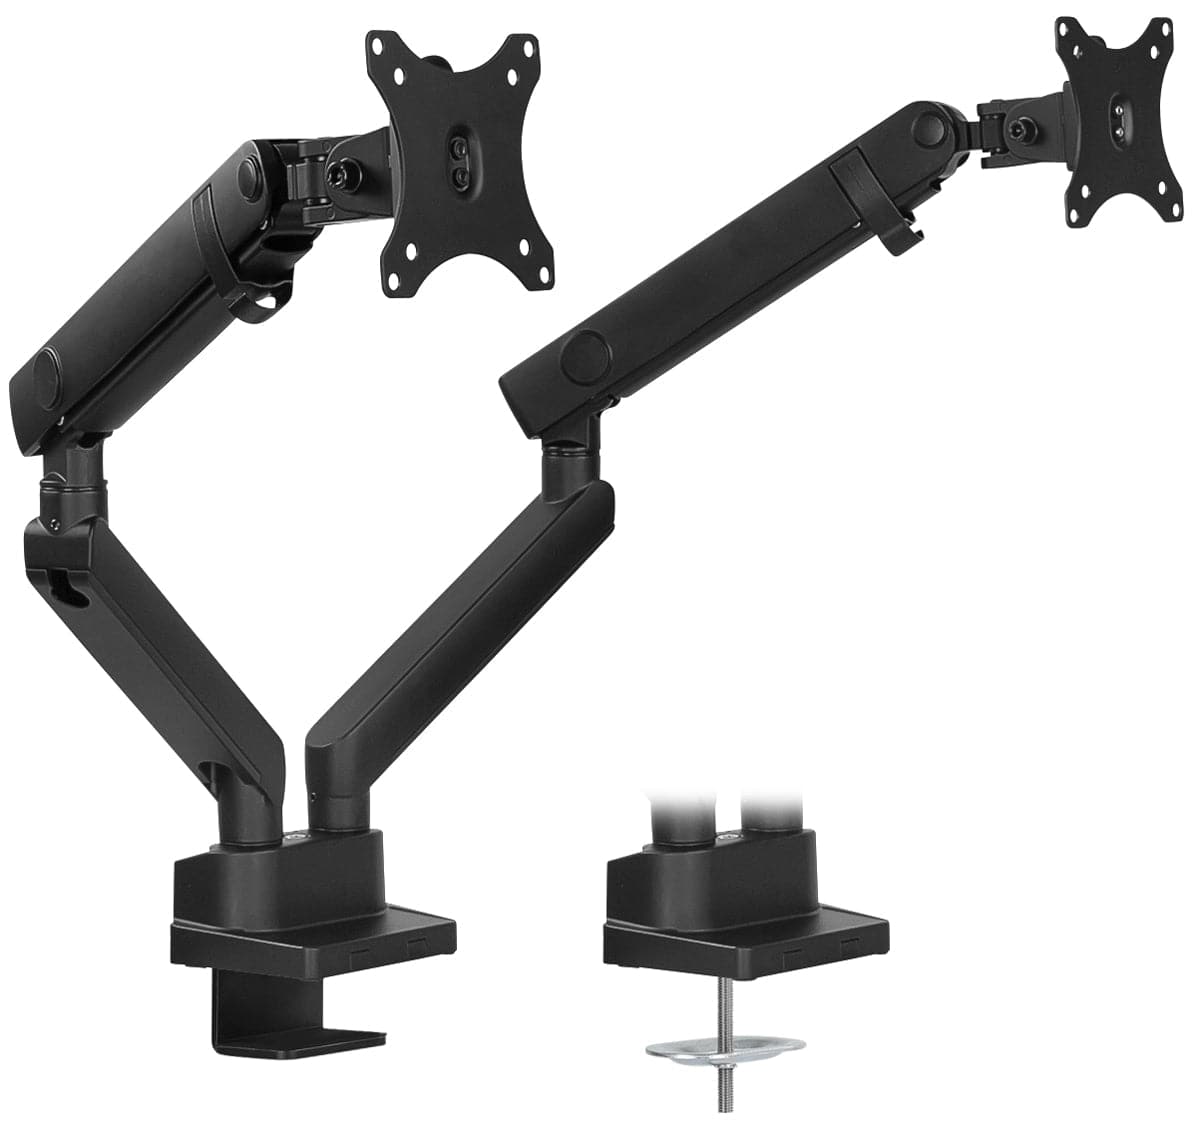 Mount-It! Dual Monitor Arm Mount Desk Stand | Fits Up to 32 Screens